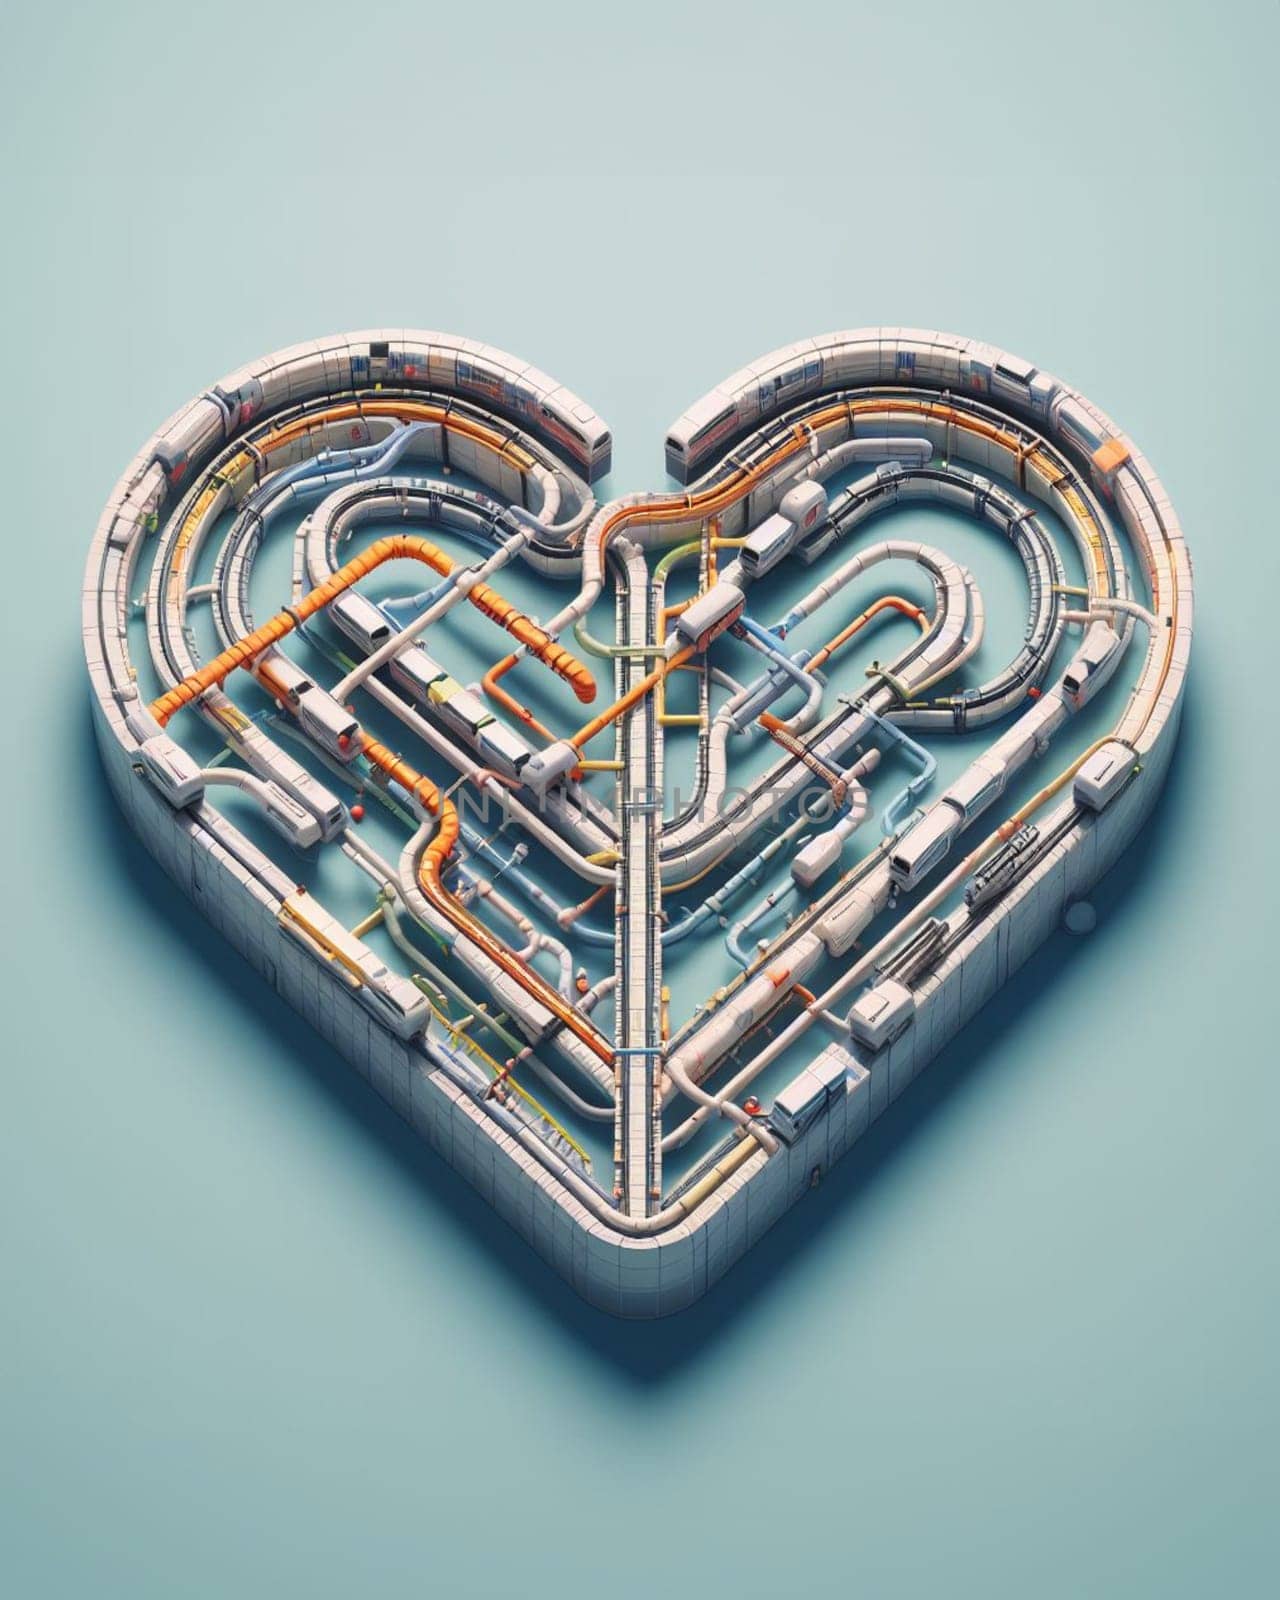 engineered heart shaped pipe system steampunk love concept isolated illustration 3d render by verbano